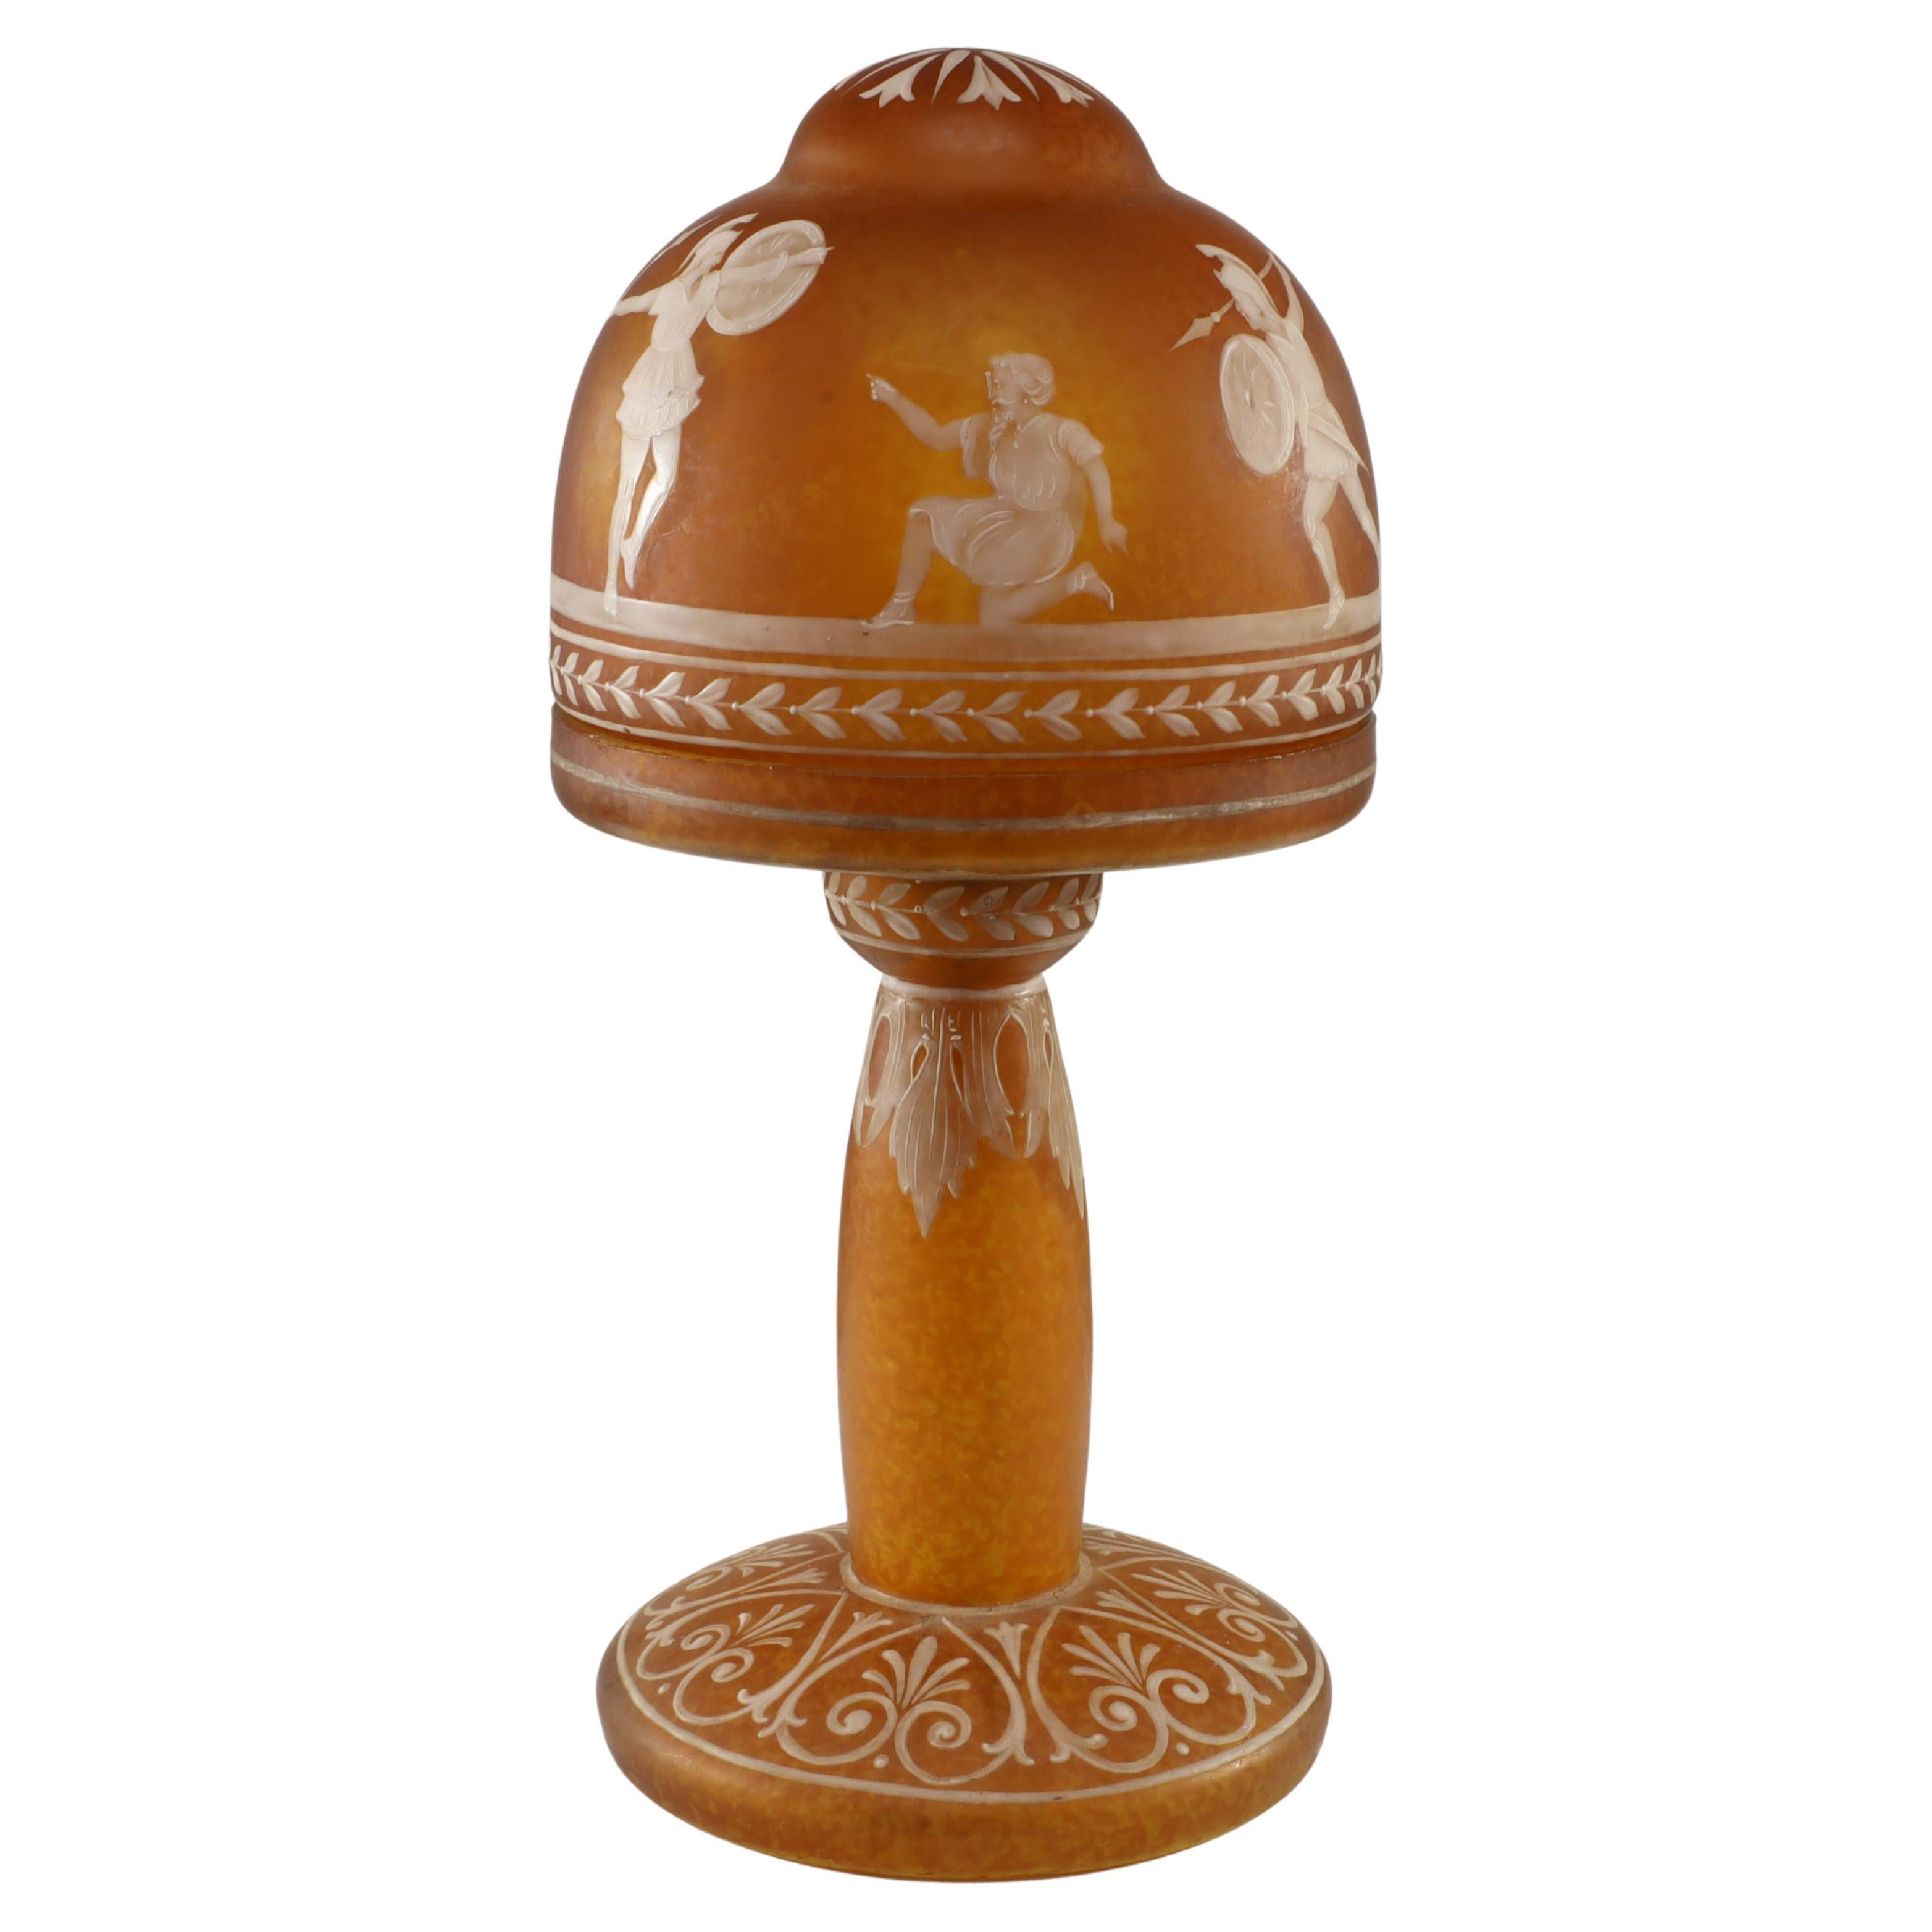 An Art Deco style mottled orange hand painted Cameo Glass style table lamp